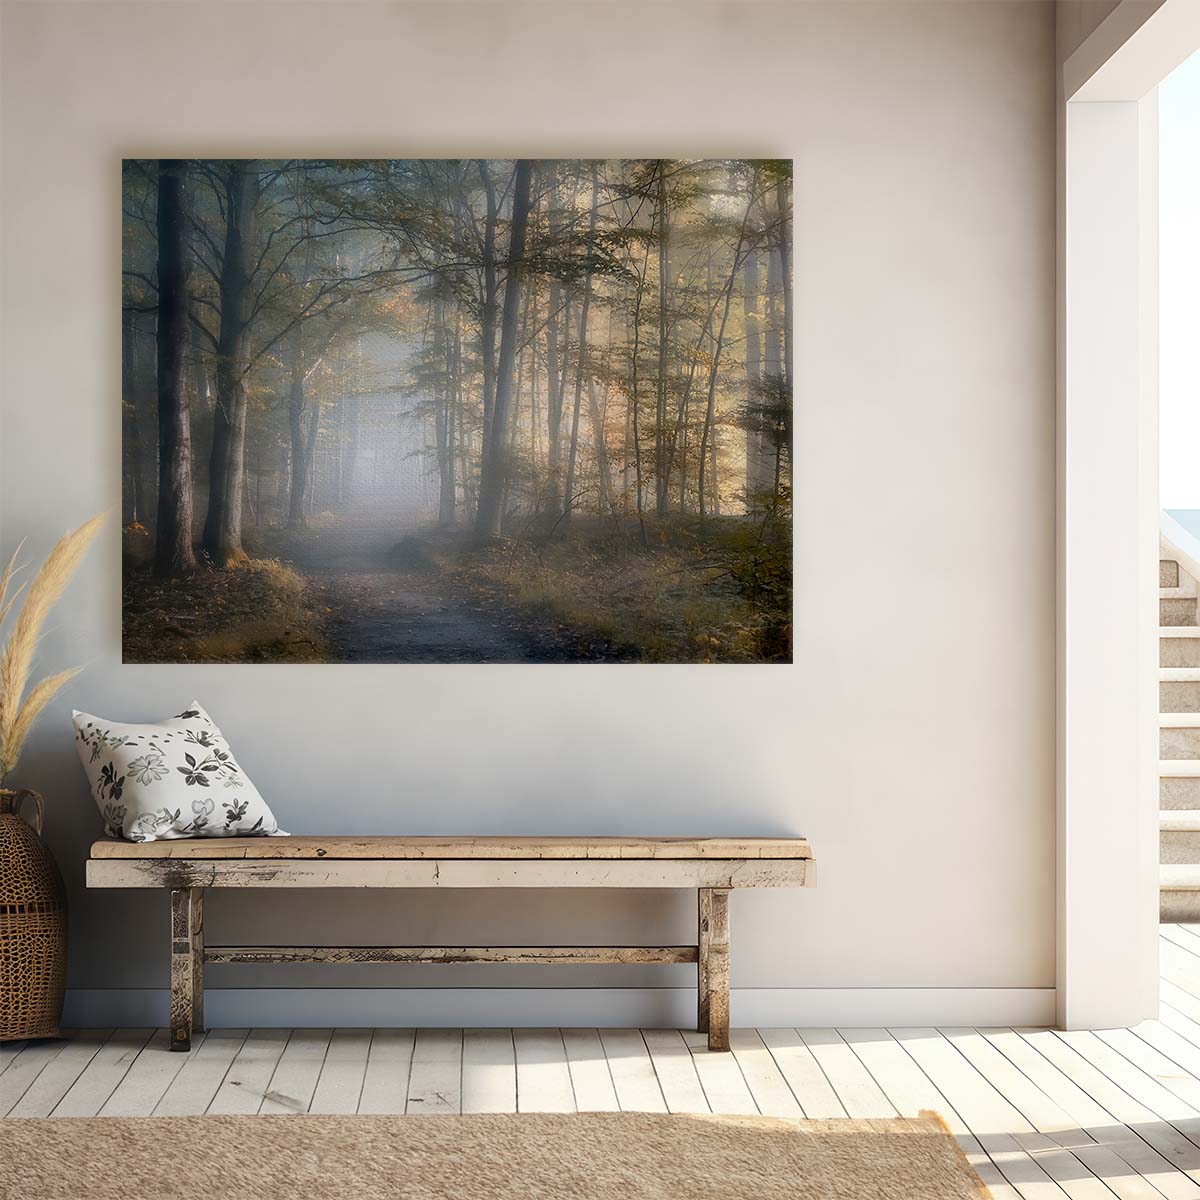 Autumnal Haze Foggy Forest Trail Panoramic Wall Art by Luxuriance Designs. Made in USA.